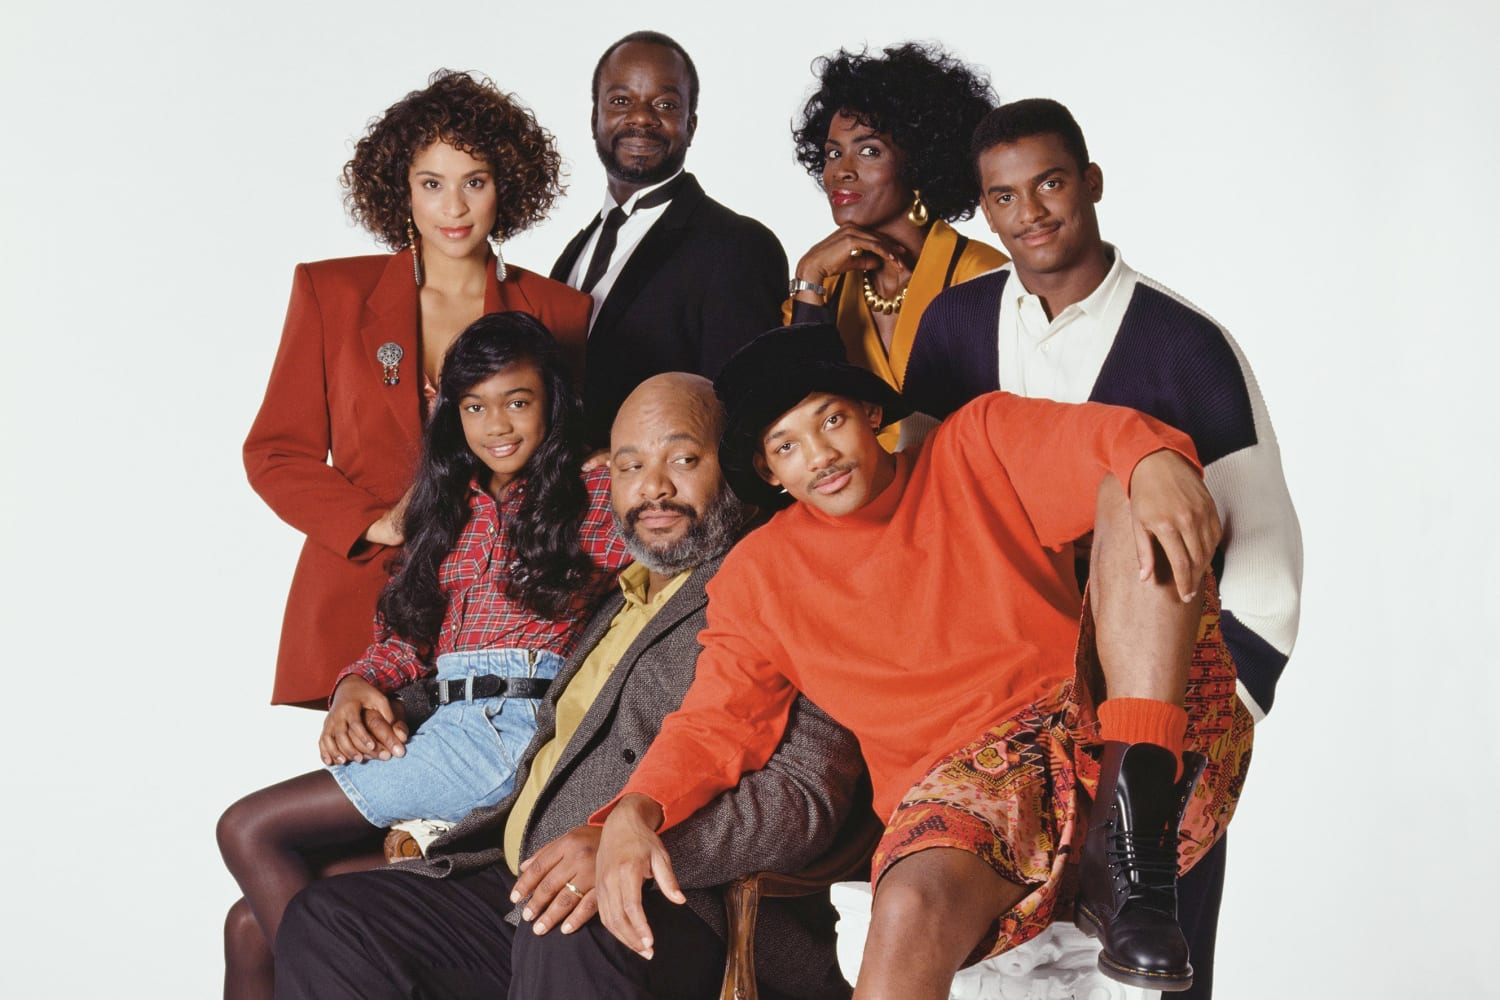 when is the fresh prince of bel air reunion